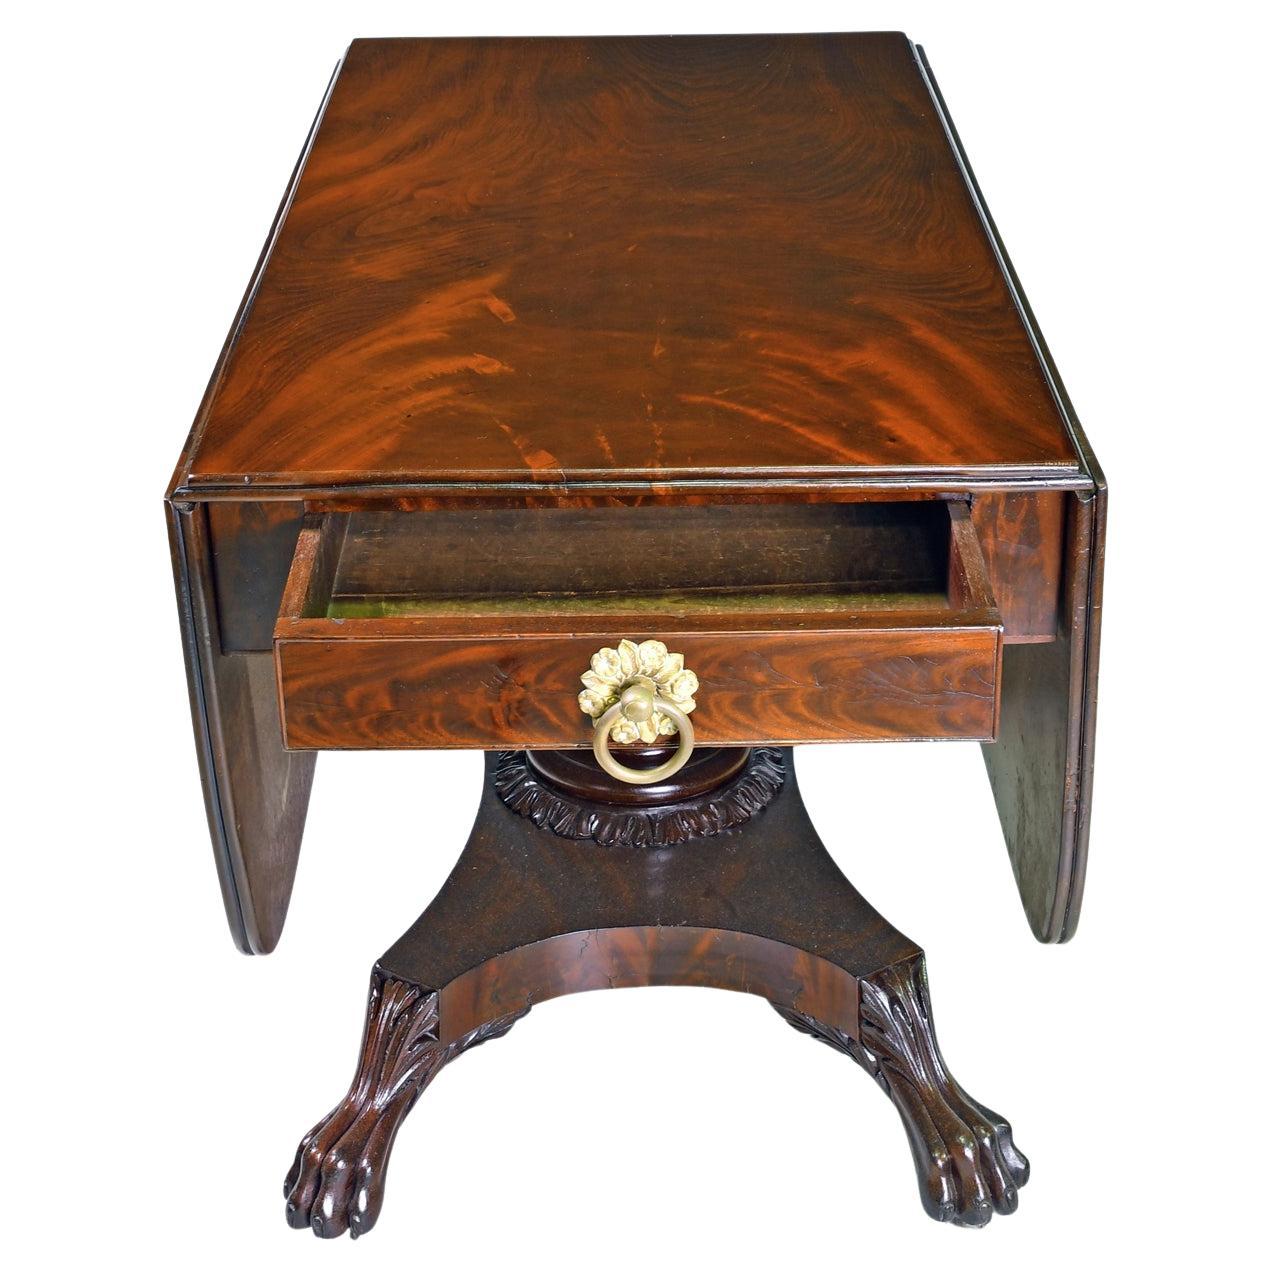 19th Century American Federal Drop Leaf Dining Table in West Indies Mahogany New York, c 1820 For Sale